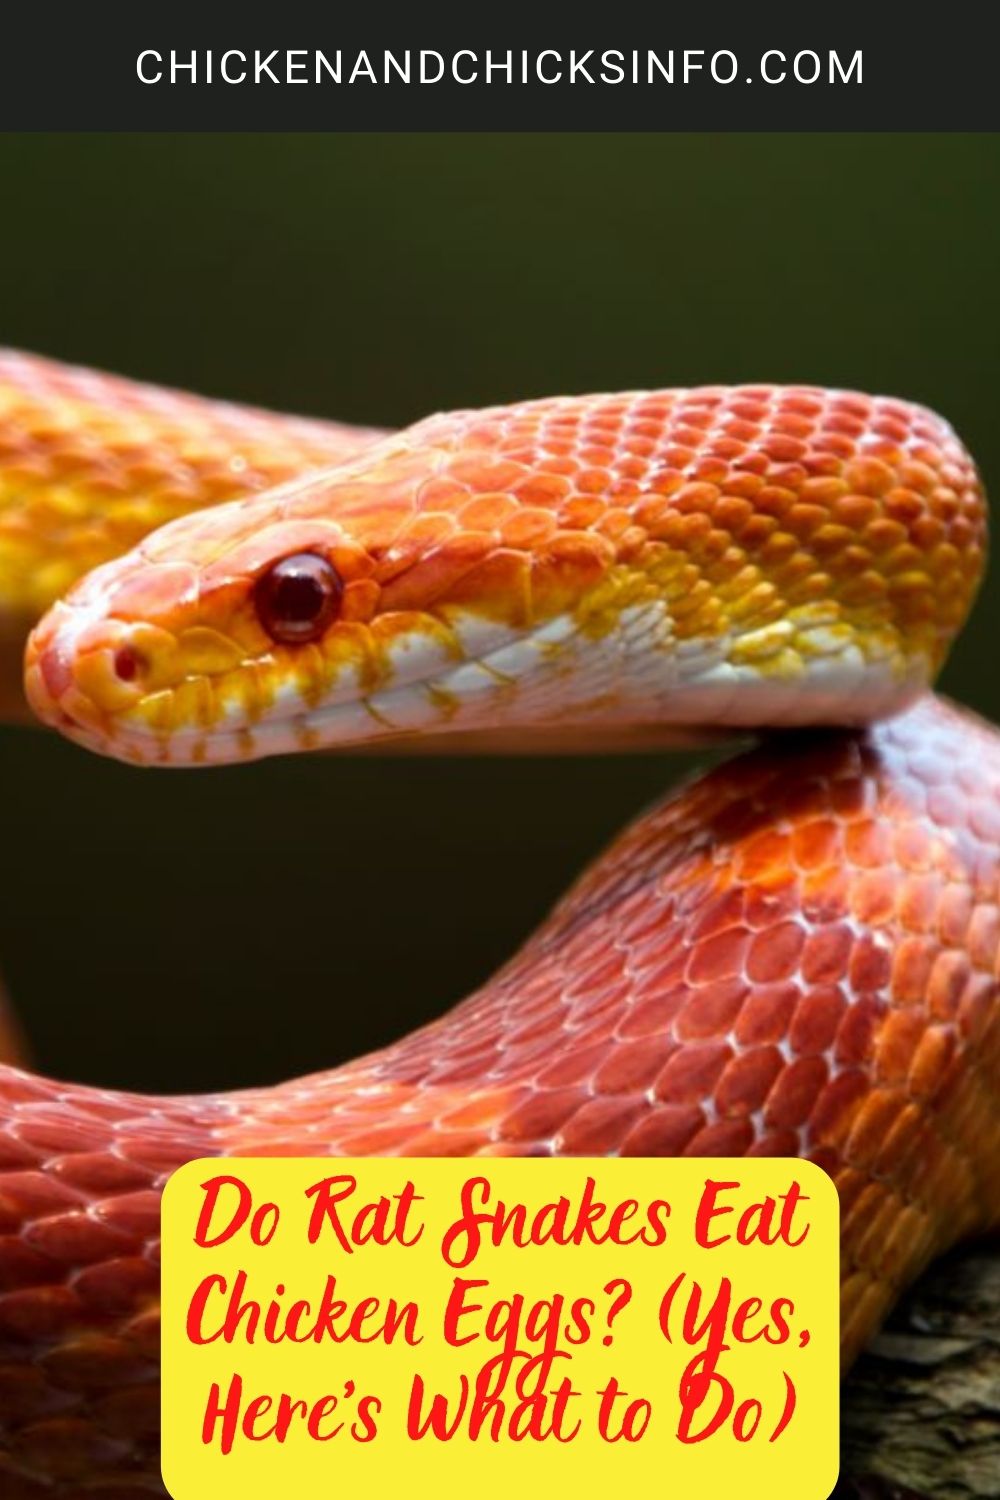 Do Rat Snakes Eat Chicken Eggs? (Yes, Here’s What to Do) poster.
